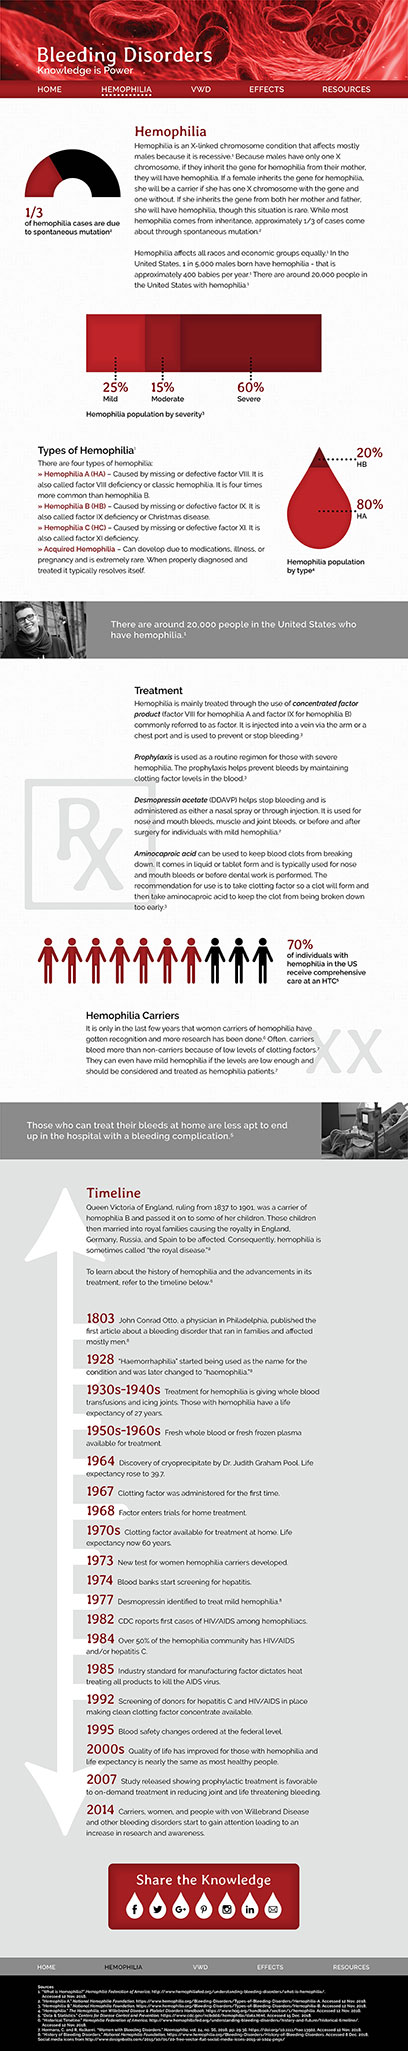 Hemophilia page from the bleeding disorders website